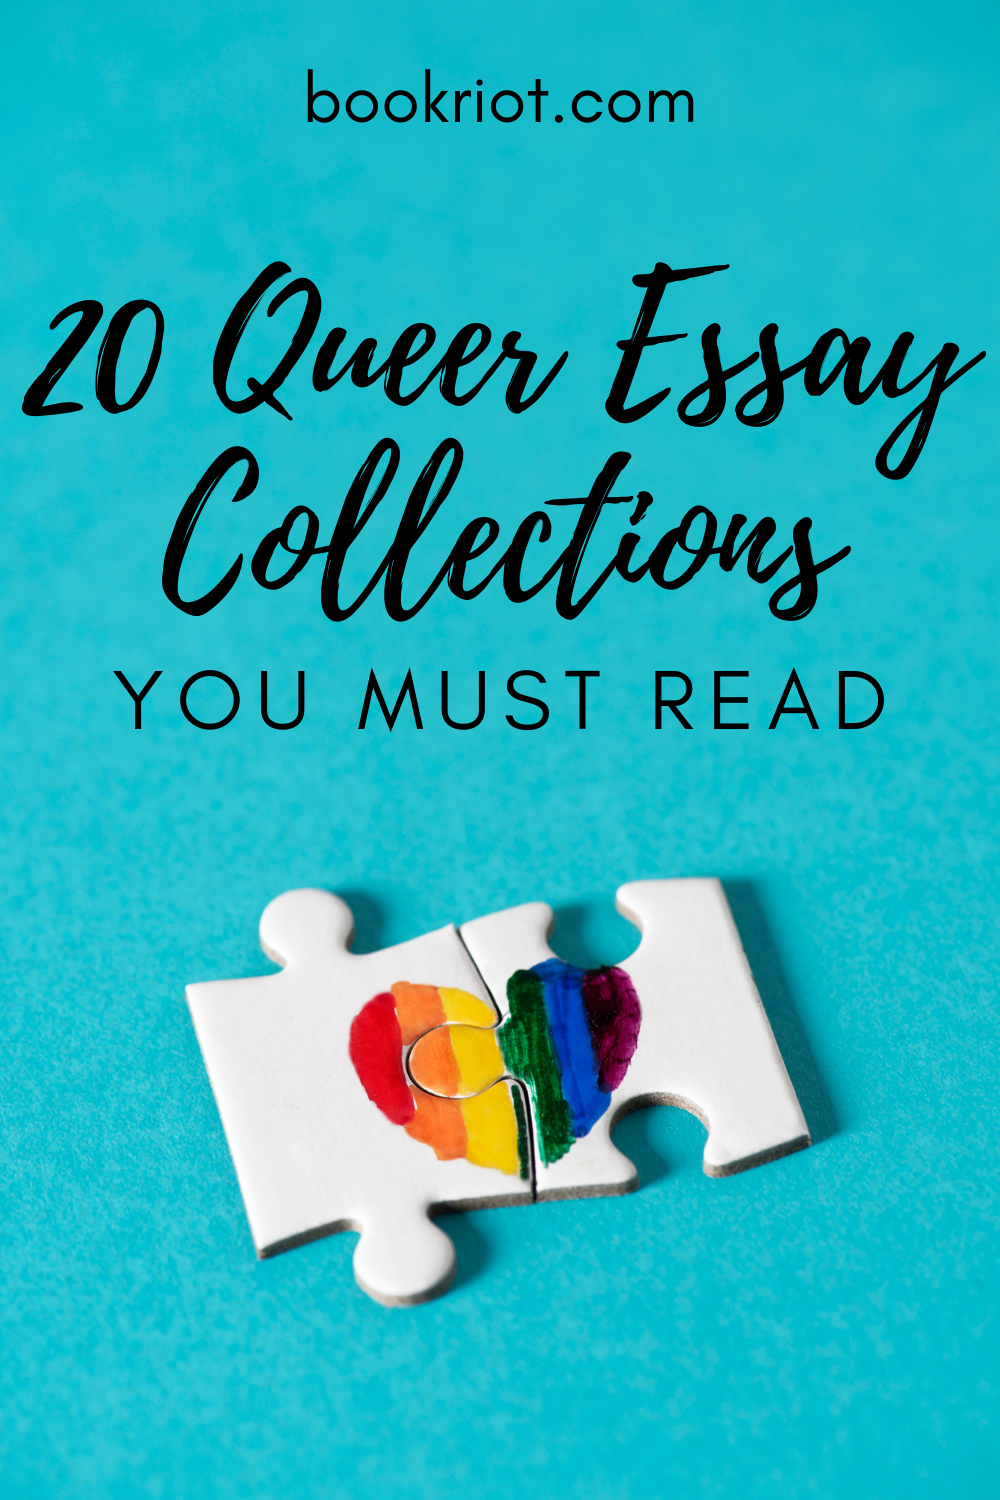 queer essay collections